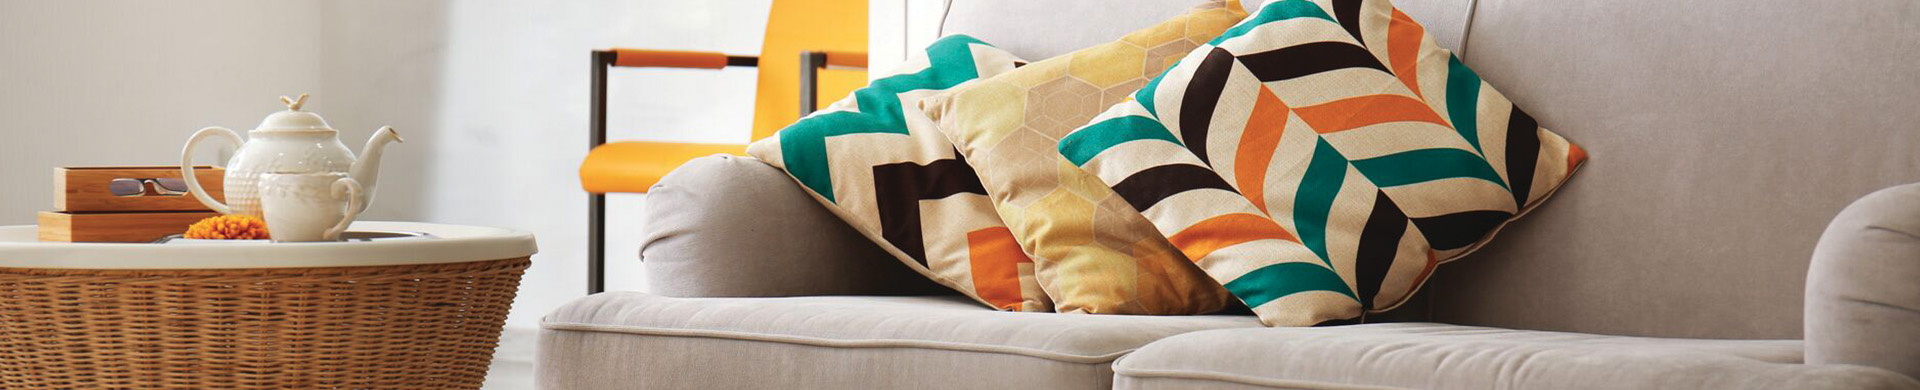 cropped photo of a couch with pillows